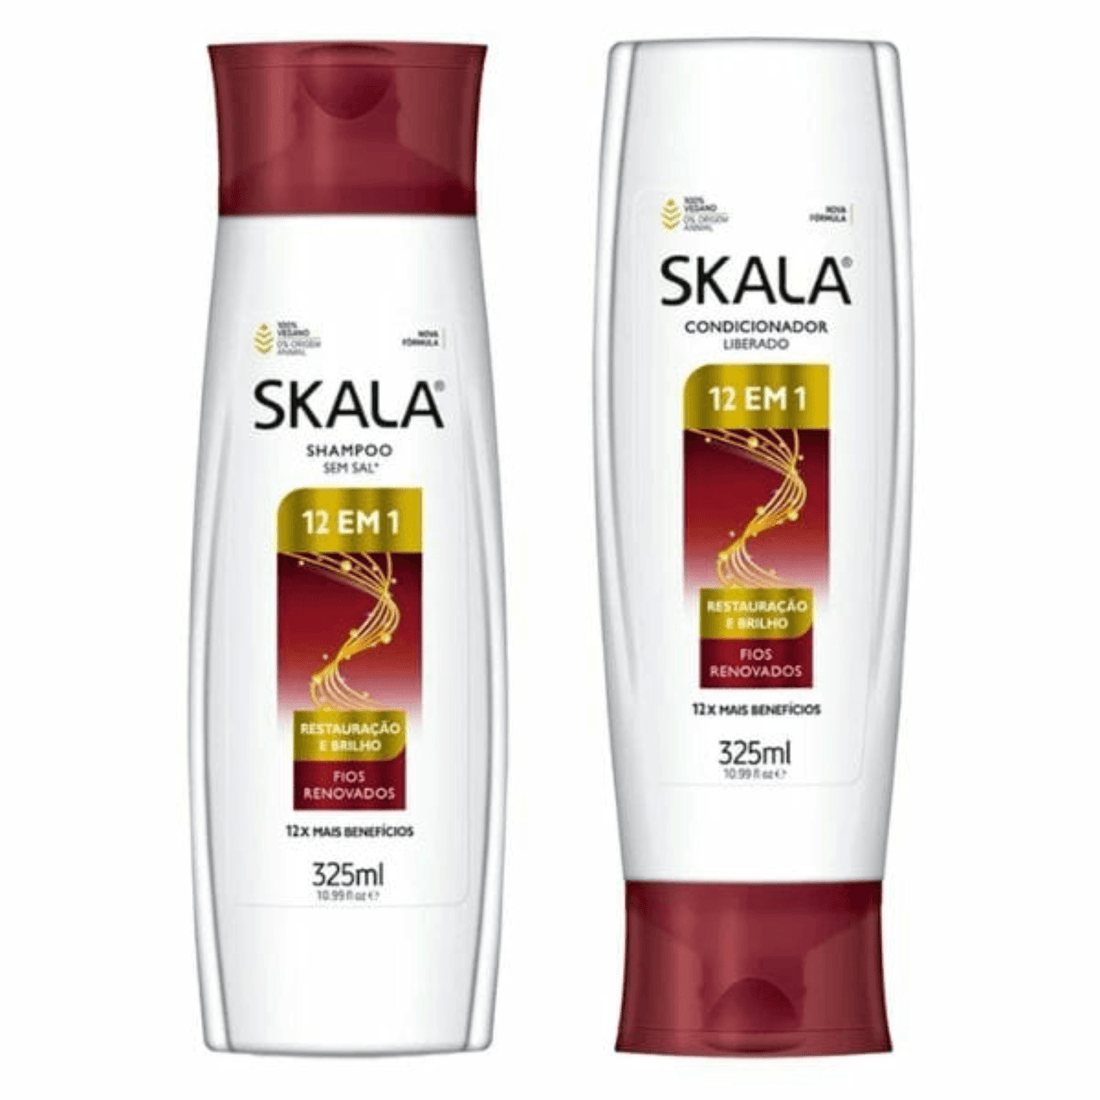 Skala Expert Collection 12 in 1 – Shampoo and Conditioner 2 x 325 ml | 2 x 10.9 oz - BUY BRAZIL STORE